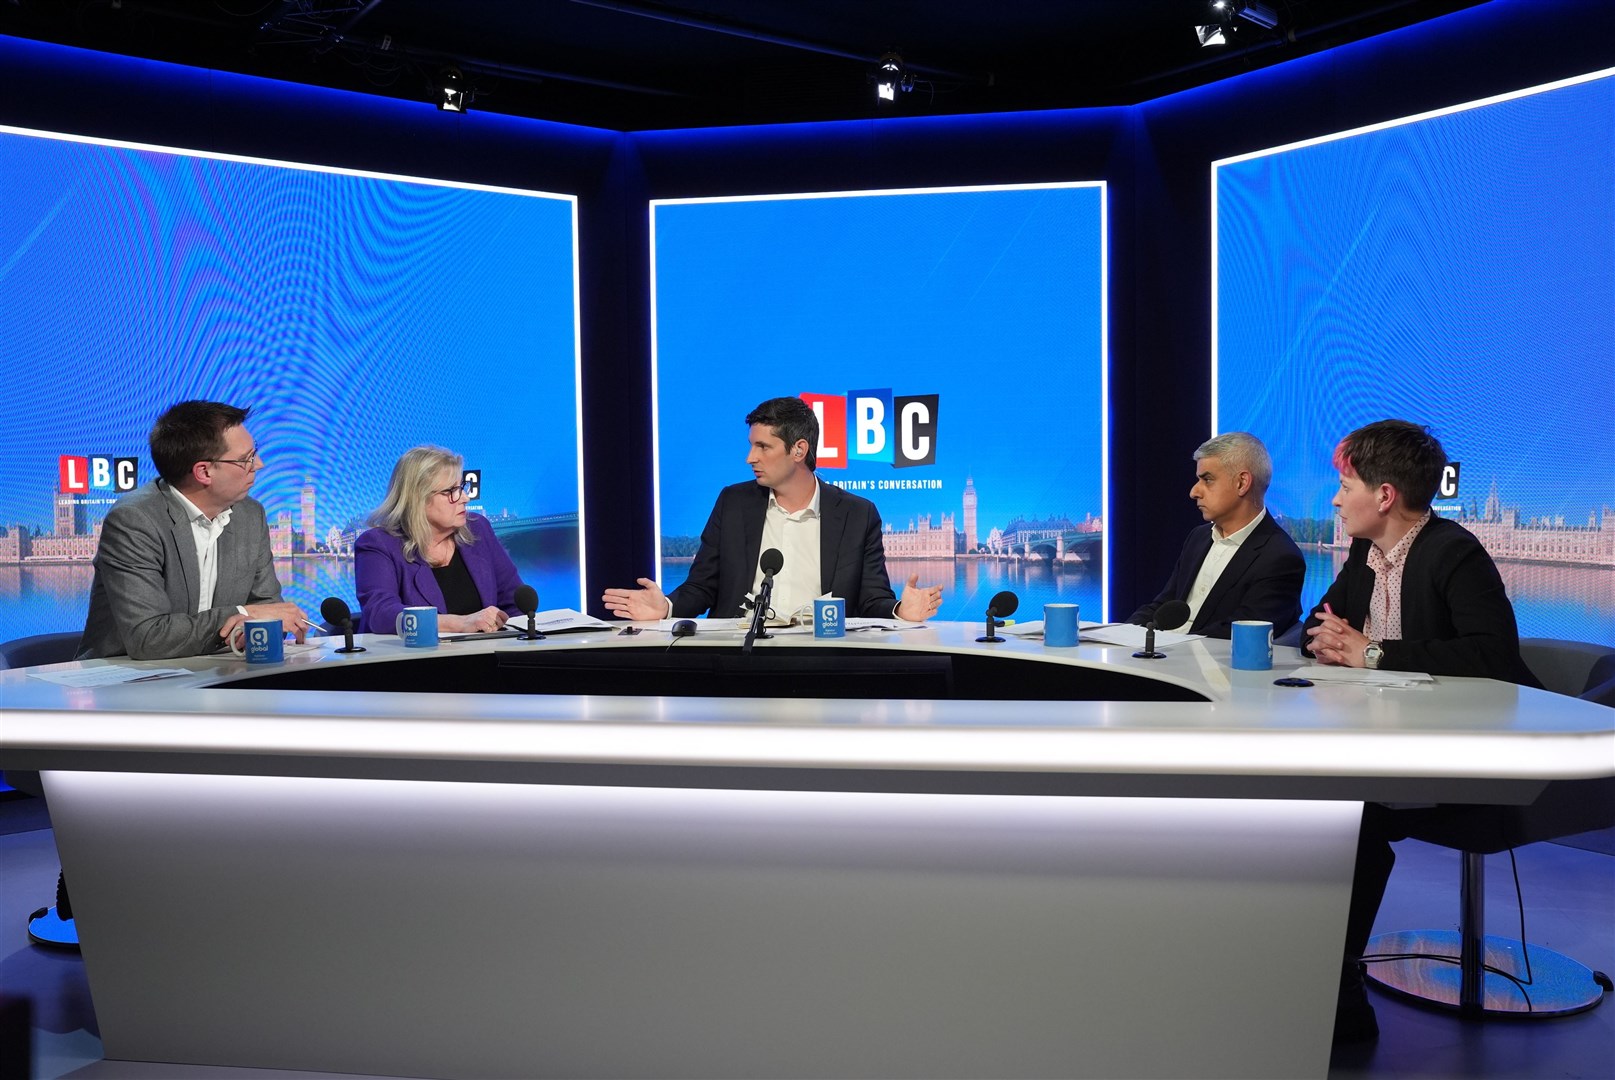 London mayoral candidates Liberal Democrat candidate Rob Blackie (left), Conservative party candidate Susan Hall, current Mayor of London and Labour party candidate Sadiq Khan and Green party candidate Zoe Garbett (right) during the LBC London Mayoral Debate (LBC/PA)